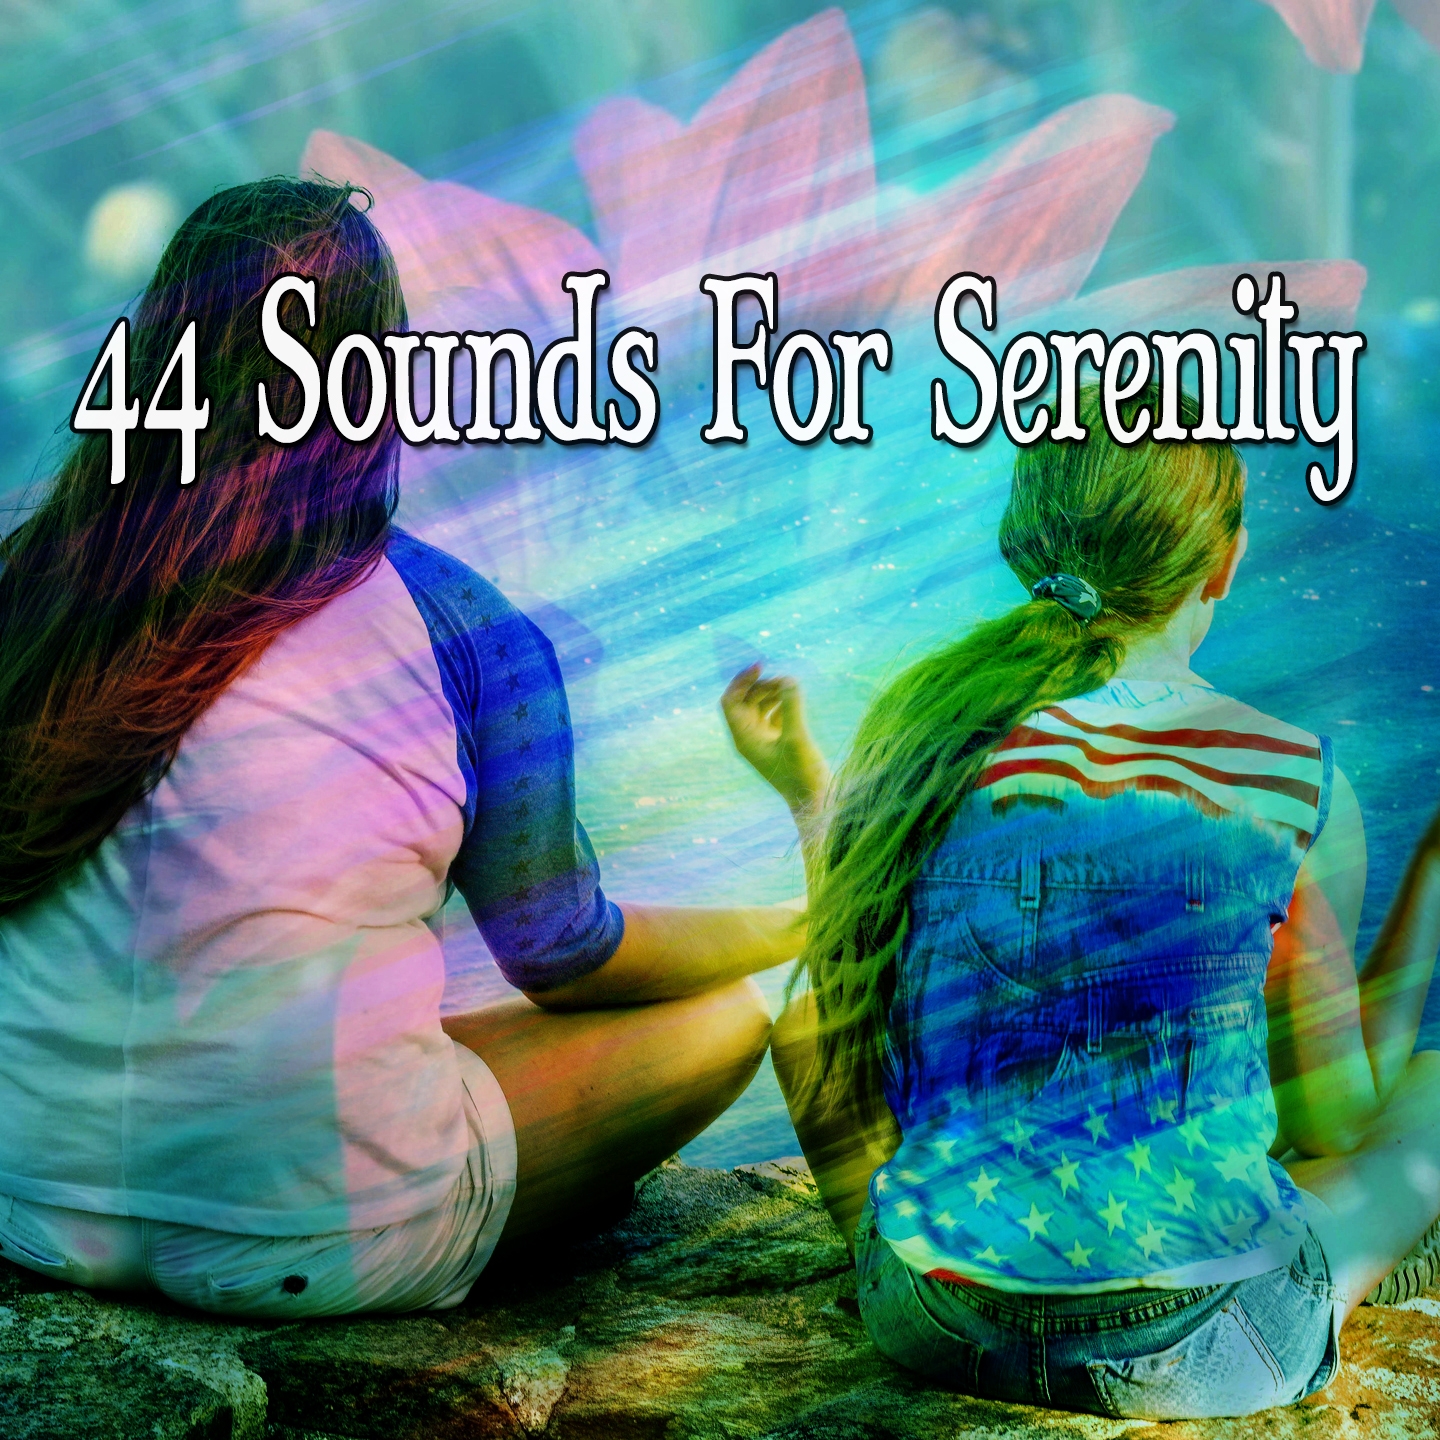 44 Sounds For Serenity